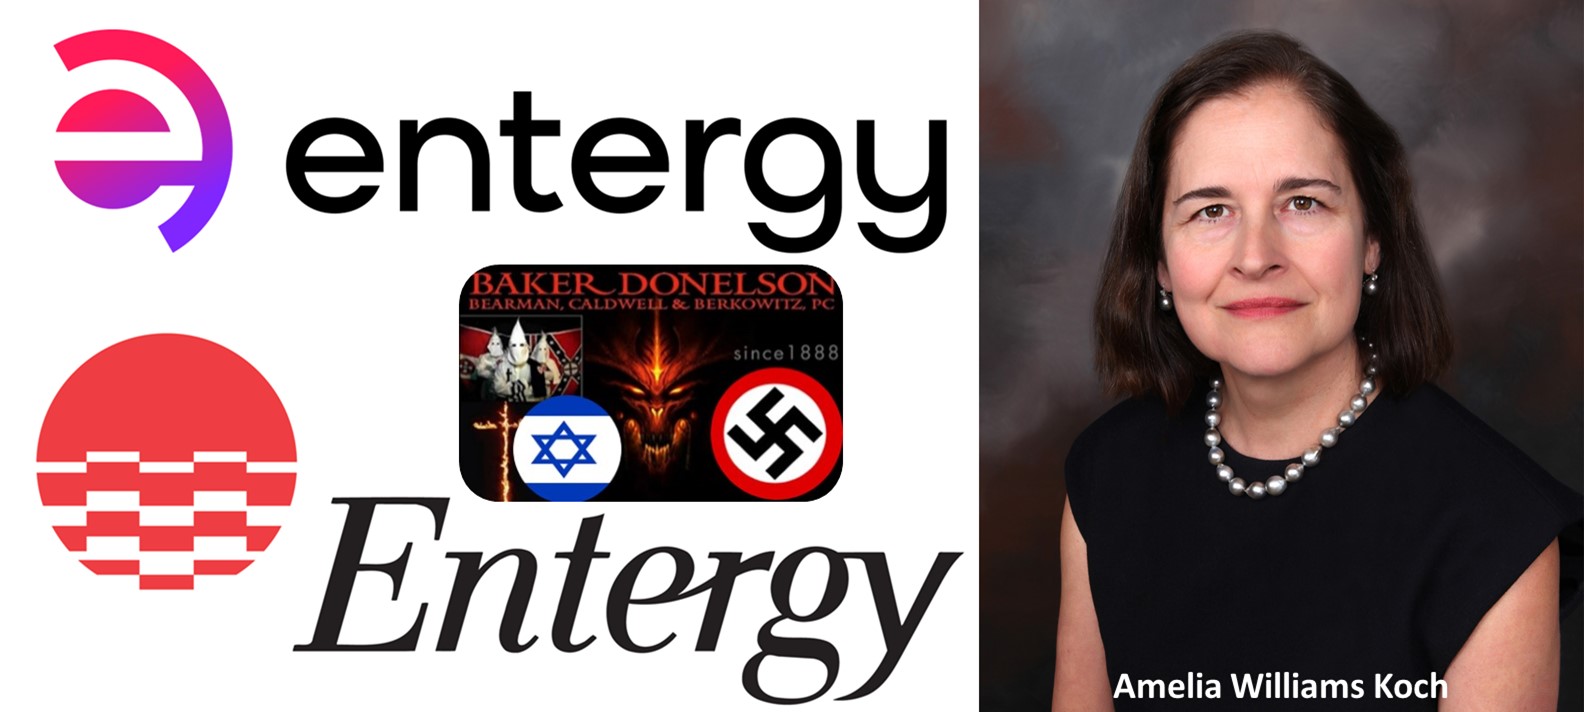 Entergy Legal Counsel Baker Donelson Amelia Williams Koch